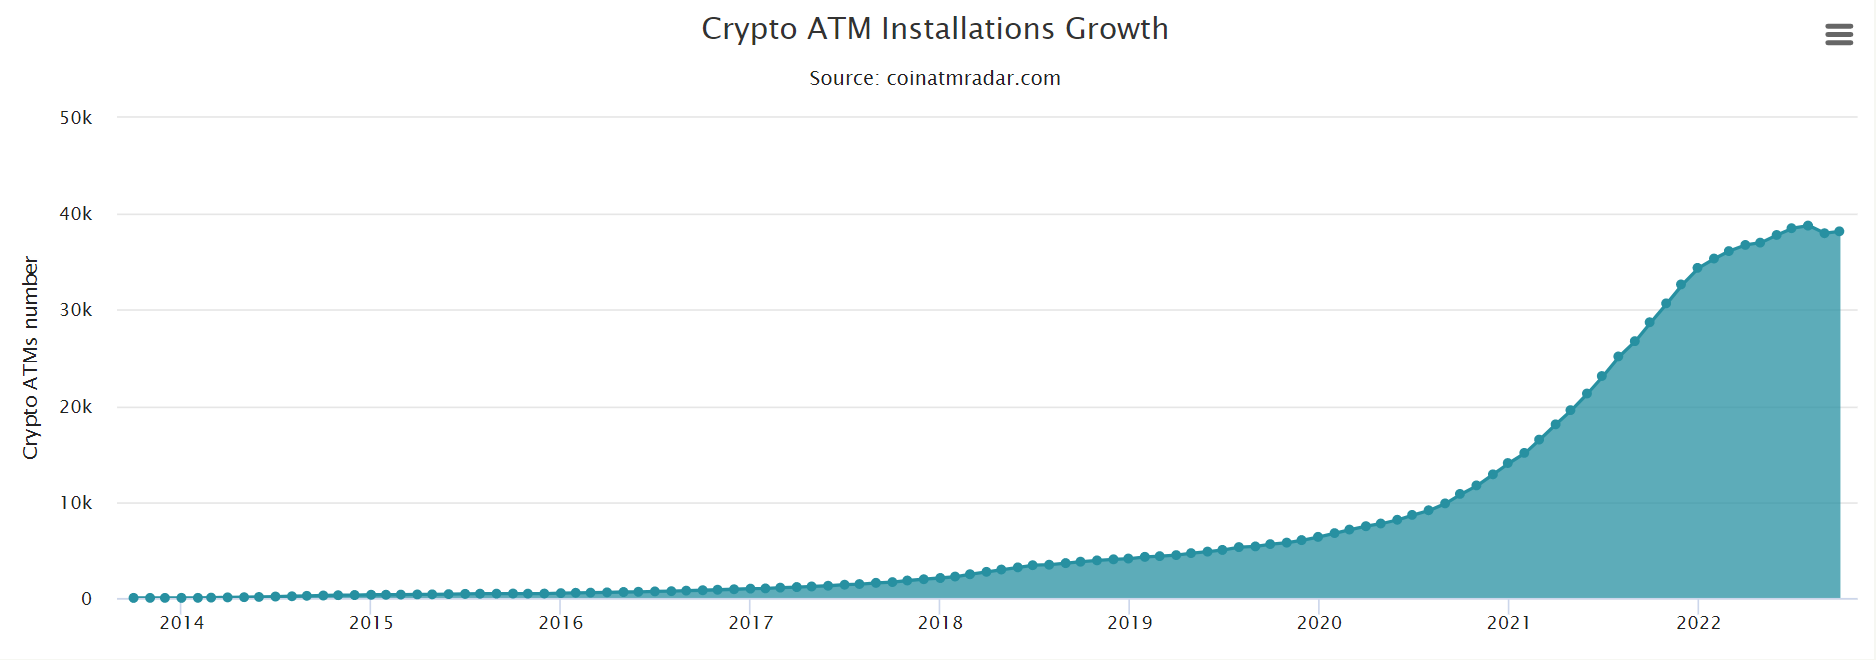 Net Bitcoin ATMs growth drops globally for the first time